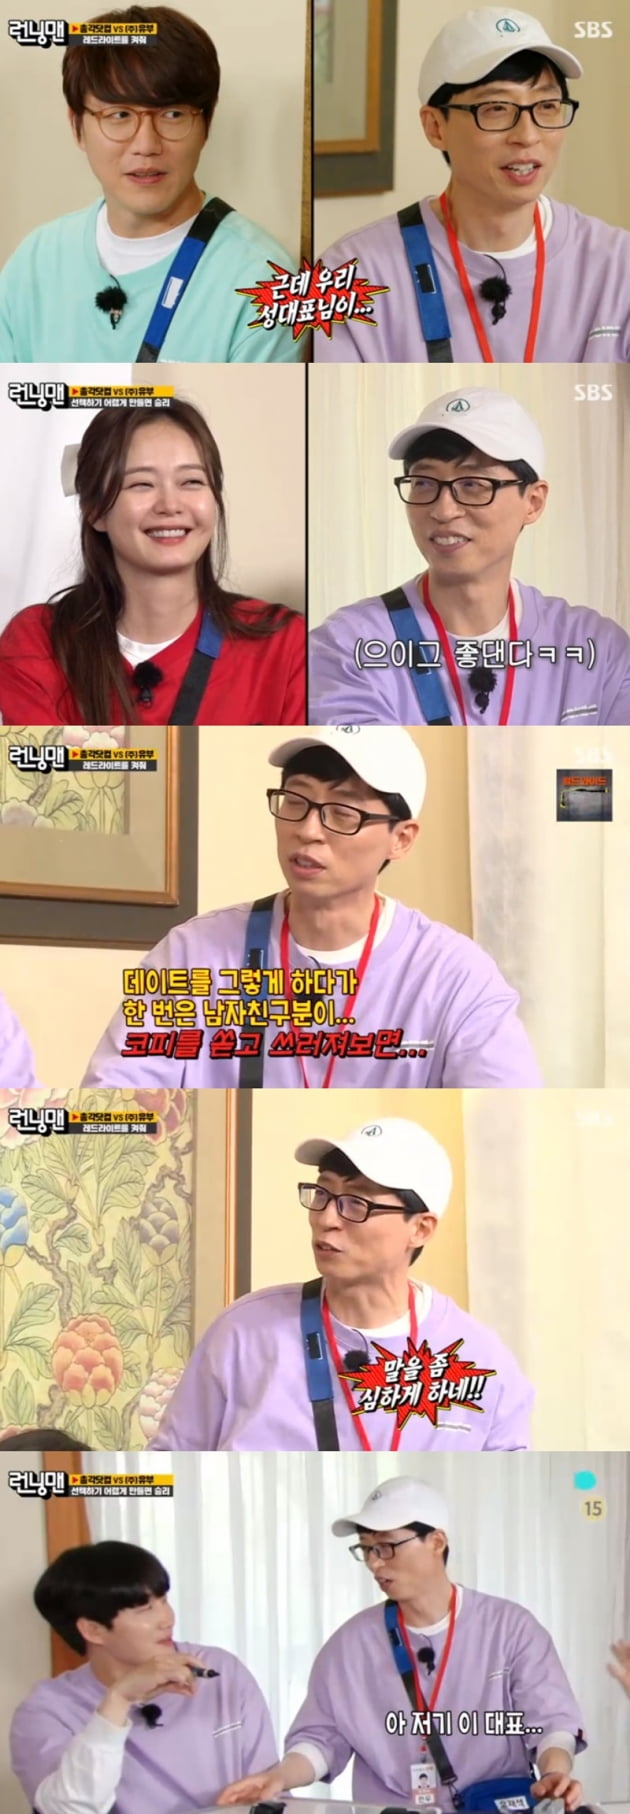 Running Man Yoo Jae-Suk expressed his consideration for his wife Na Kyung Eun during his grace.Sung Si-kyung and Lee Yong-jin appeared as guests on SBS Running Man which was broadcast on the afternoon of the 23rd.The two conducted a blind date with Jeon So-min and Song Ji-hyo, with the setting of being representatives of Bachelor.com and Were You Couple companies.Sung Si-kyung began to speak and act as the members told him; Sung Si-kyung ate the bread without touching it, eating it with his mouth and joking.Lee Yong-jin attracted attention by acting naturally with words that Yoo Jae-Suk did not say.Yoo Jae-Suk said he remembers Lee Yong-jins wifes name, and he caught the eye by saying his name.He then surprised everyone by mentioning his wife Na Kyung Eun and Ji Suk-jins wifes name, and Kim Jong Kook and X-Man couple Yoon Eun-hye.Song Ji-hyo said, I do not want to be married.I want to be someone who knows sorry, Lee Yong-jin said seriously, and broke the atmosphere by singing Im sorry.After the Avatar blind date, Jeon So-min and Song Ji-hyo voted for someone who was objectively more likeable.Jeon So-min gave a vote to Sung Si-kyung, saying, I thought Lee Yong-jin was originally a funny person, but I did not know that Sung Si-kyung was such a funny person.Song Ji-hyo also gave a ticket to Sung Si-kyung, who met his eyes.Then, the section Turn the Red Light was parodied by Sung Si-kyung in the past.Sung Si-kyung read the story of forced weekend dating, and the members said they needed breath-blowing and oxygen respirators.Yoo Jae-Suk quipped, Why do not you spill your nose once you are dating and fall down?Song Ji-hyo represented the position of women, saying, It is a matter of expression rather than frequency.Yoo Jae-Suk said: I fight too, my wife is hot, and I open the door and go out in cold situations.The owner of the house is Na Kyung Eun, he said, expressing his affection for his wife.Meanwhile, the final victory on the day was a married team with Yoo Jae-Suk and Lee Yong-jin.a fairy tale that children and adults hear togetherstar behind photoℑat the same time as the latest issue